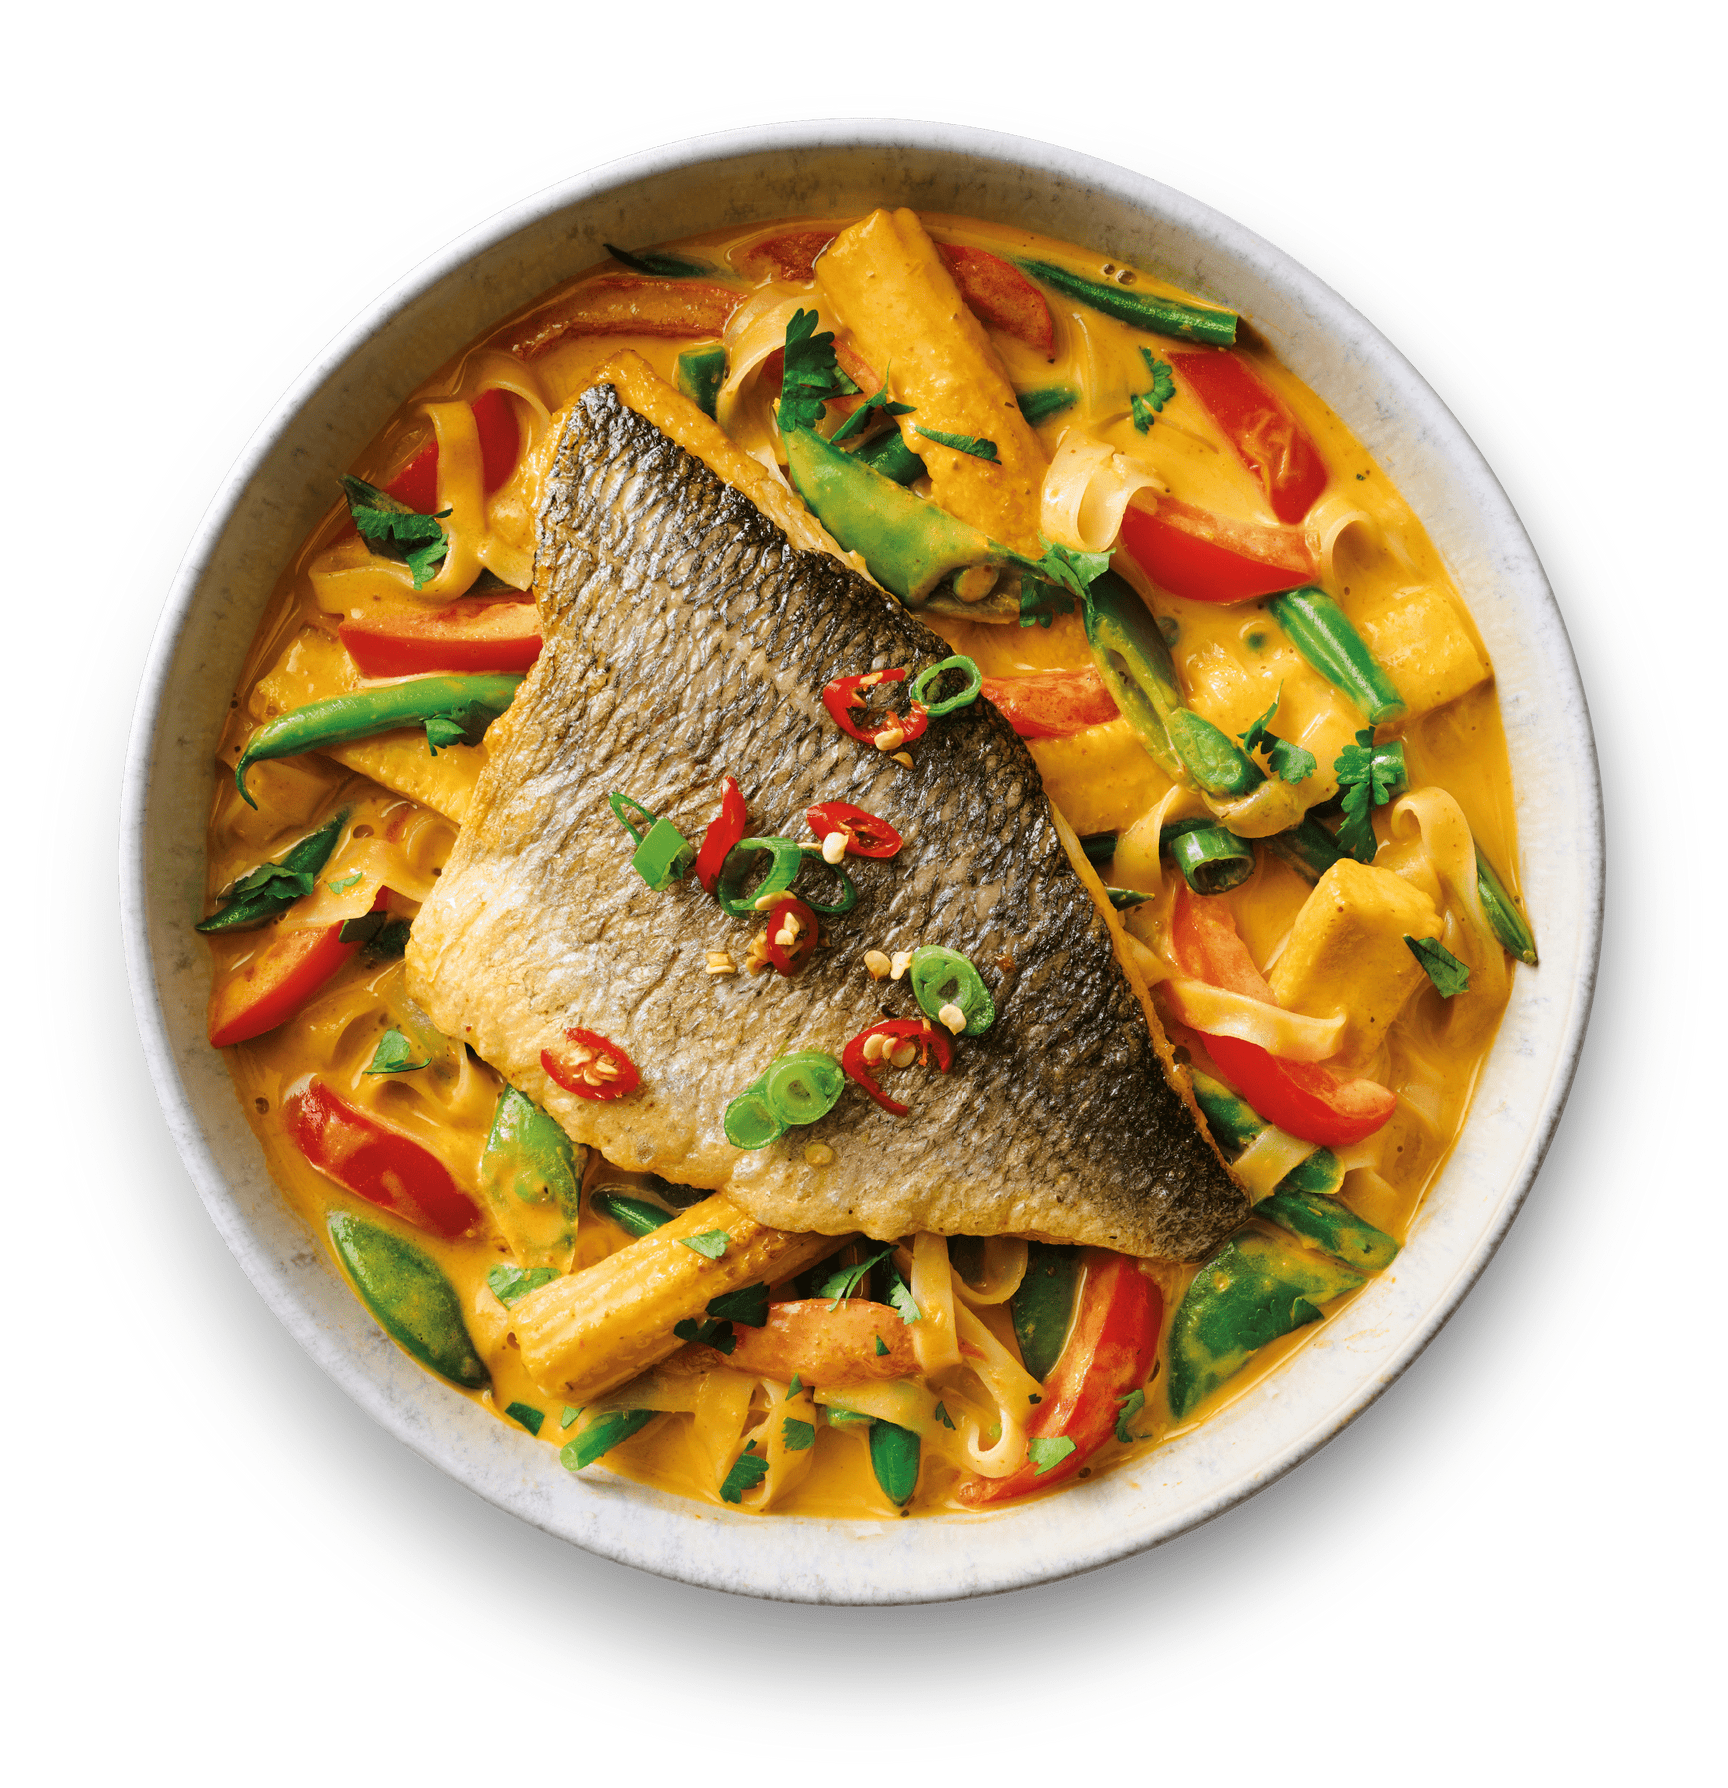 Fred's sea bream with Thai red curry and noodles